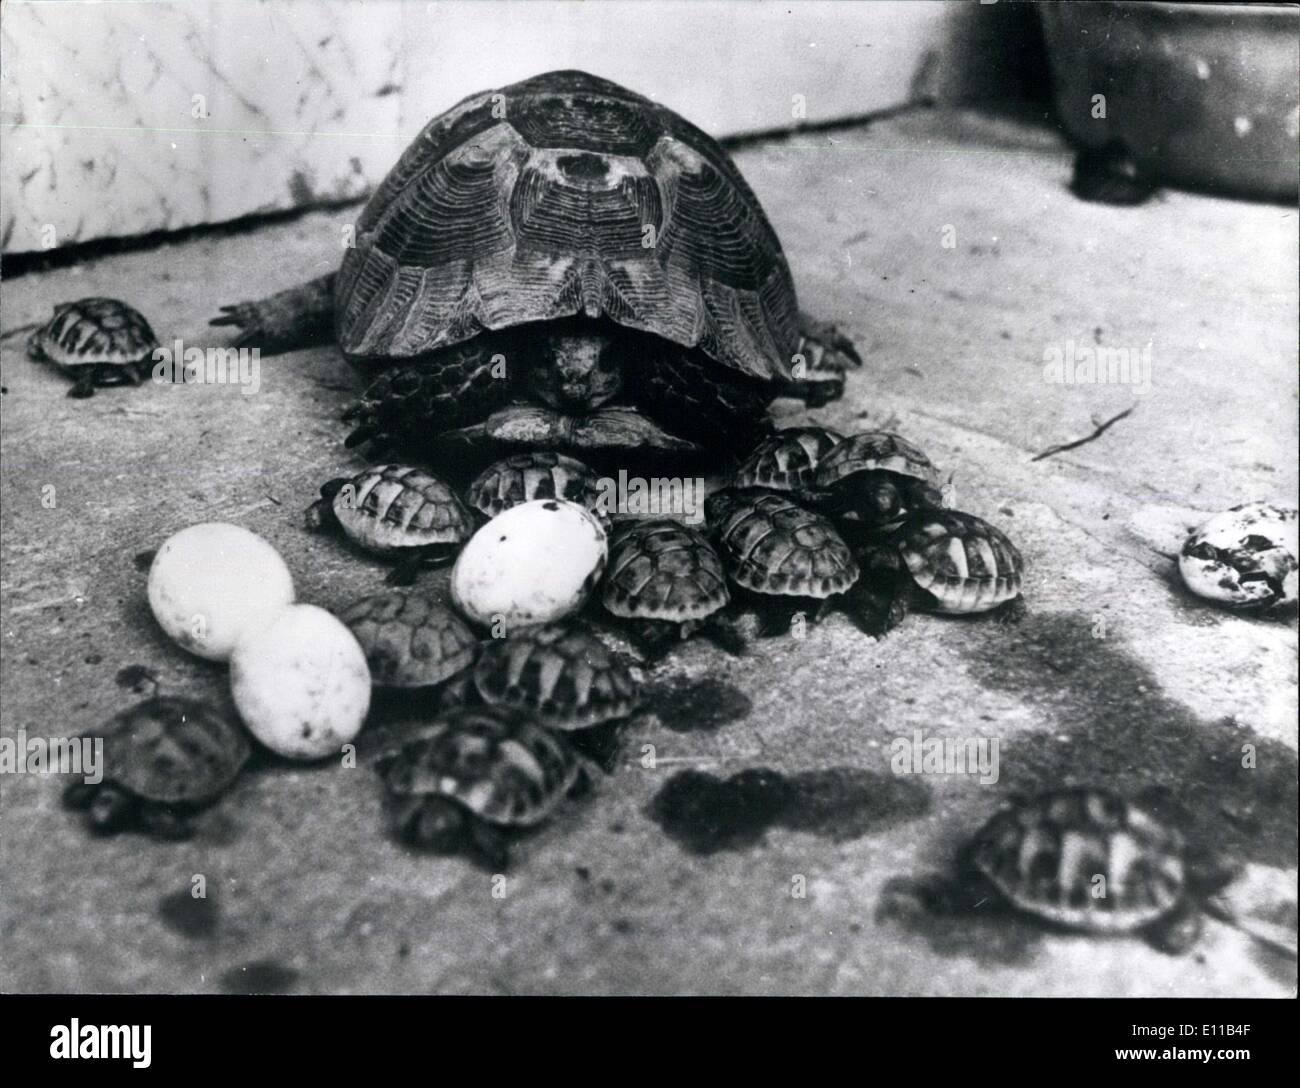 Oct. 21, 1976 - 14 young Turtles: A very rare event in a private zoo in ...